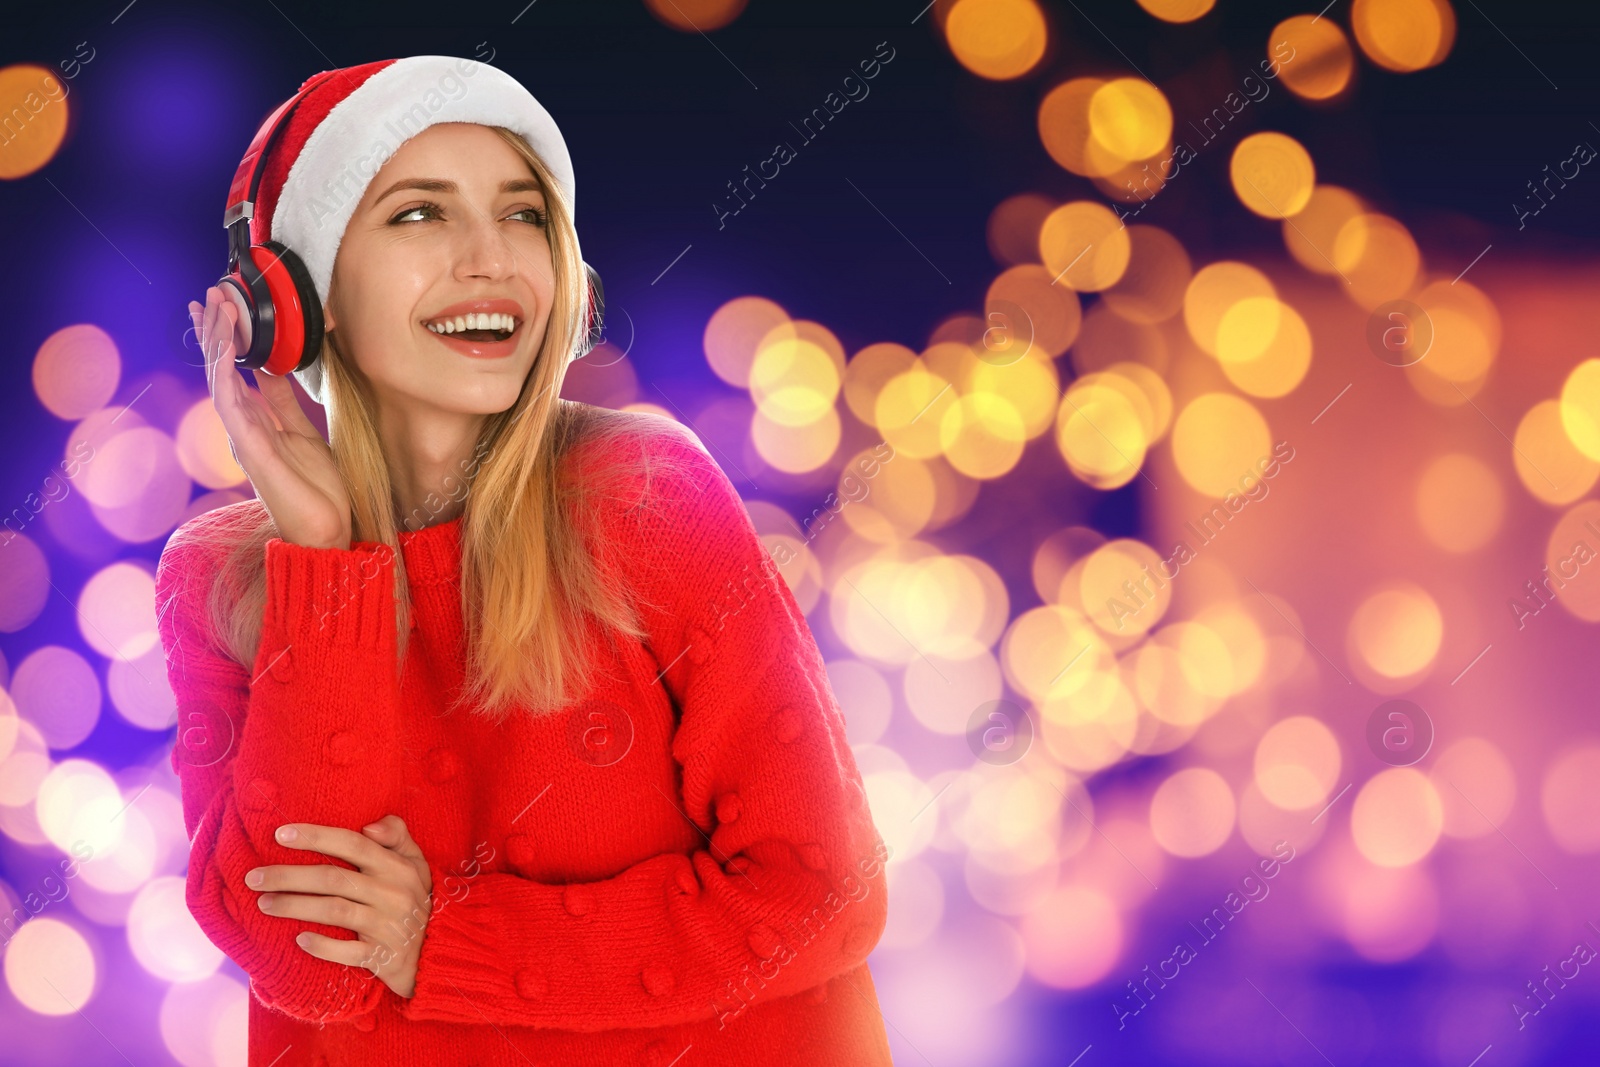 Image of Happy woman in Santa hat listening to Christmas music with headphones on bright background, bokeh effect